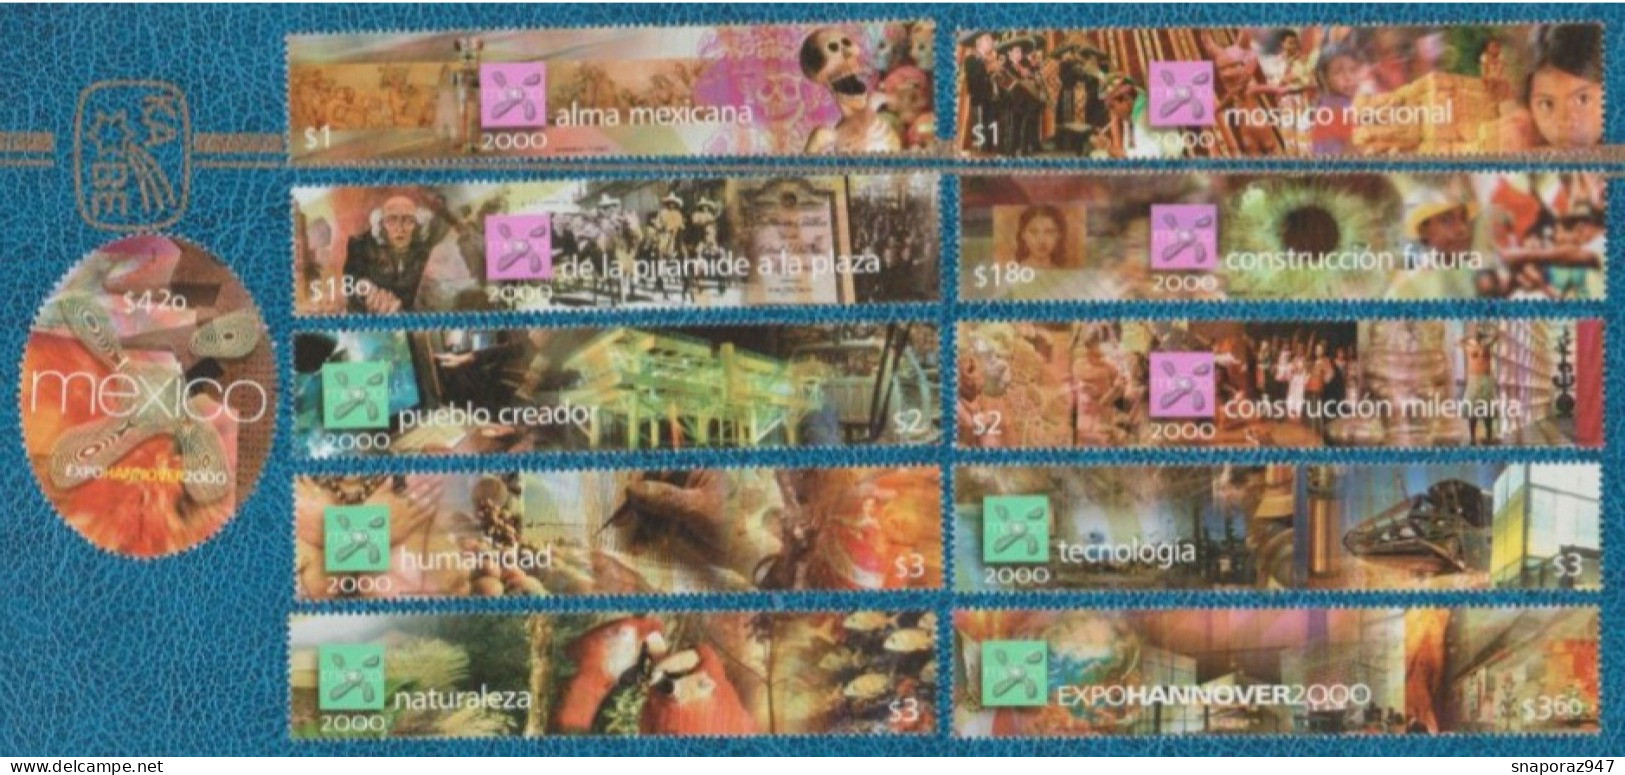 2000 Messico "Expo 2000" Universal Exhibition In Hanover (Block Printed) Set MNH** RX77 - 2000 – Hanover (Germany)